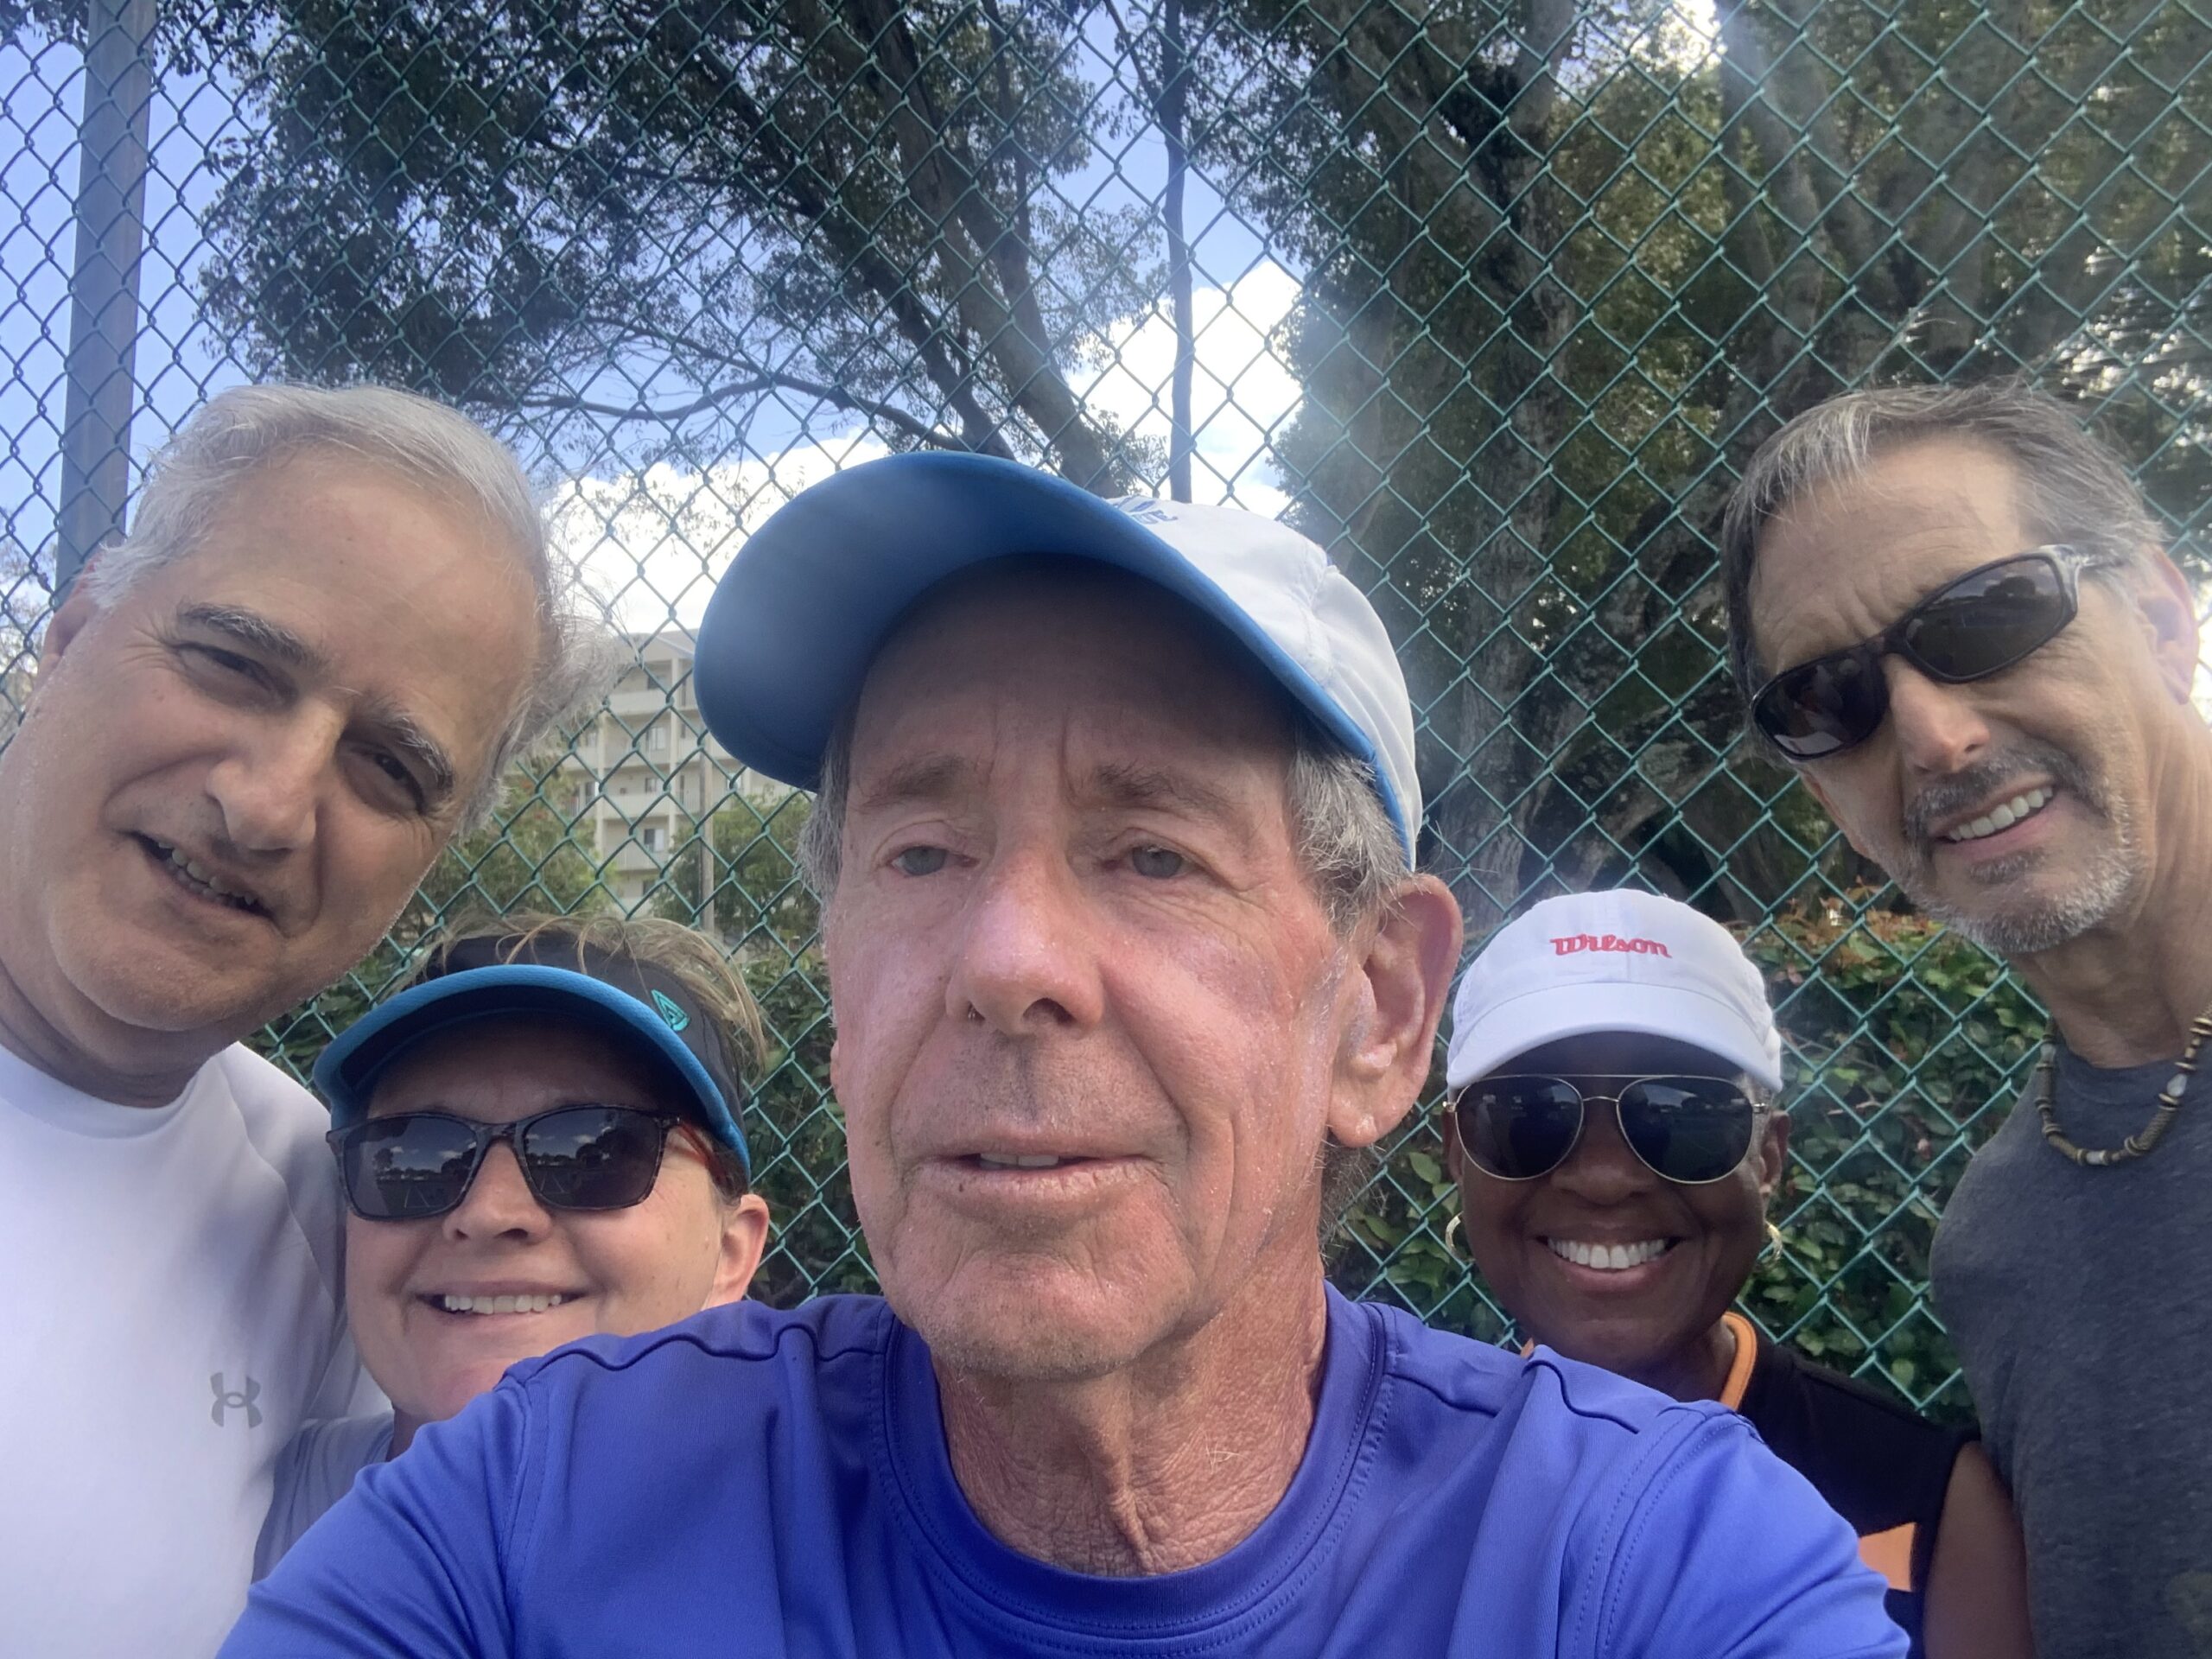 Bob-with-Patricia-Tama-Geoff-and-Ted-after-an-Advanced-Beginners-Clinic-in-Delray-Beach-FL